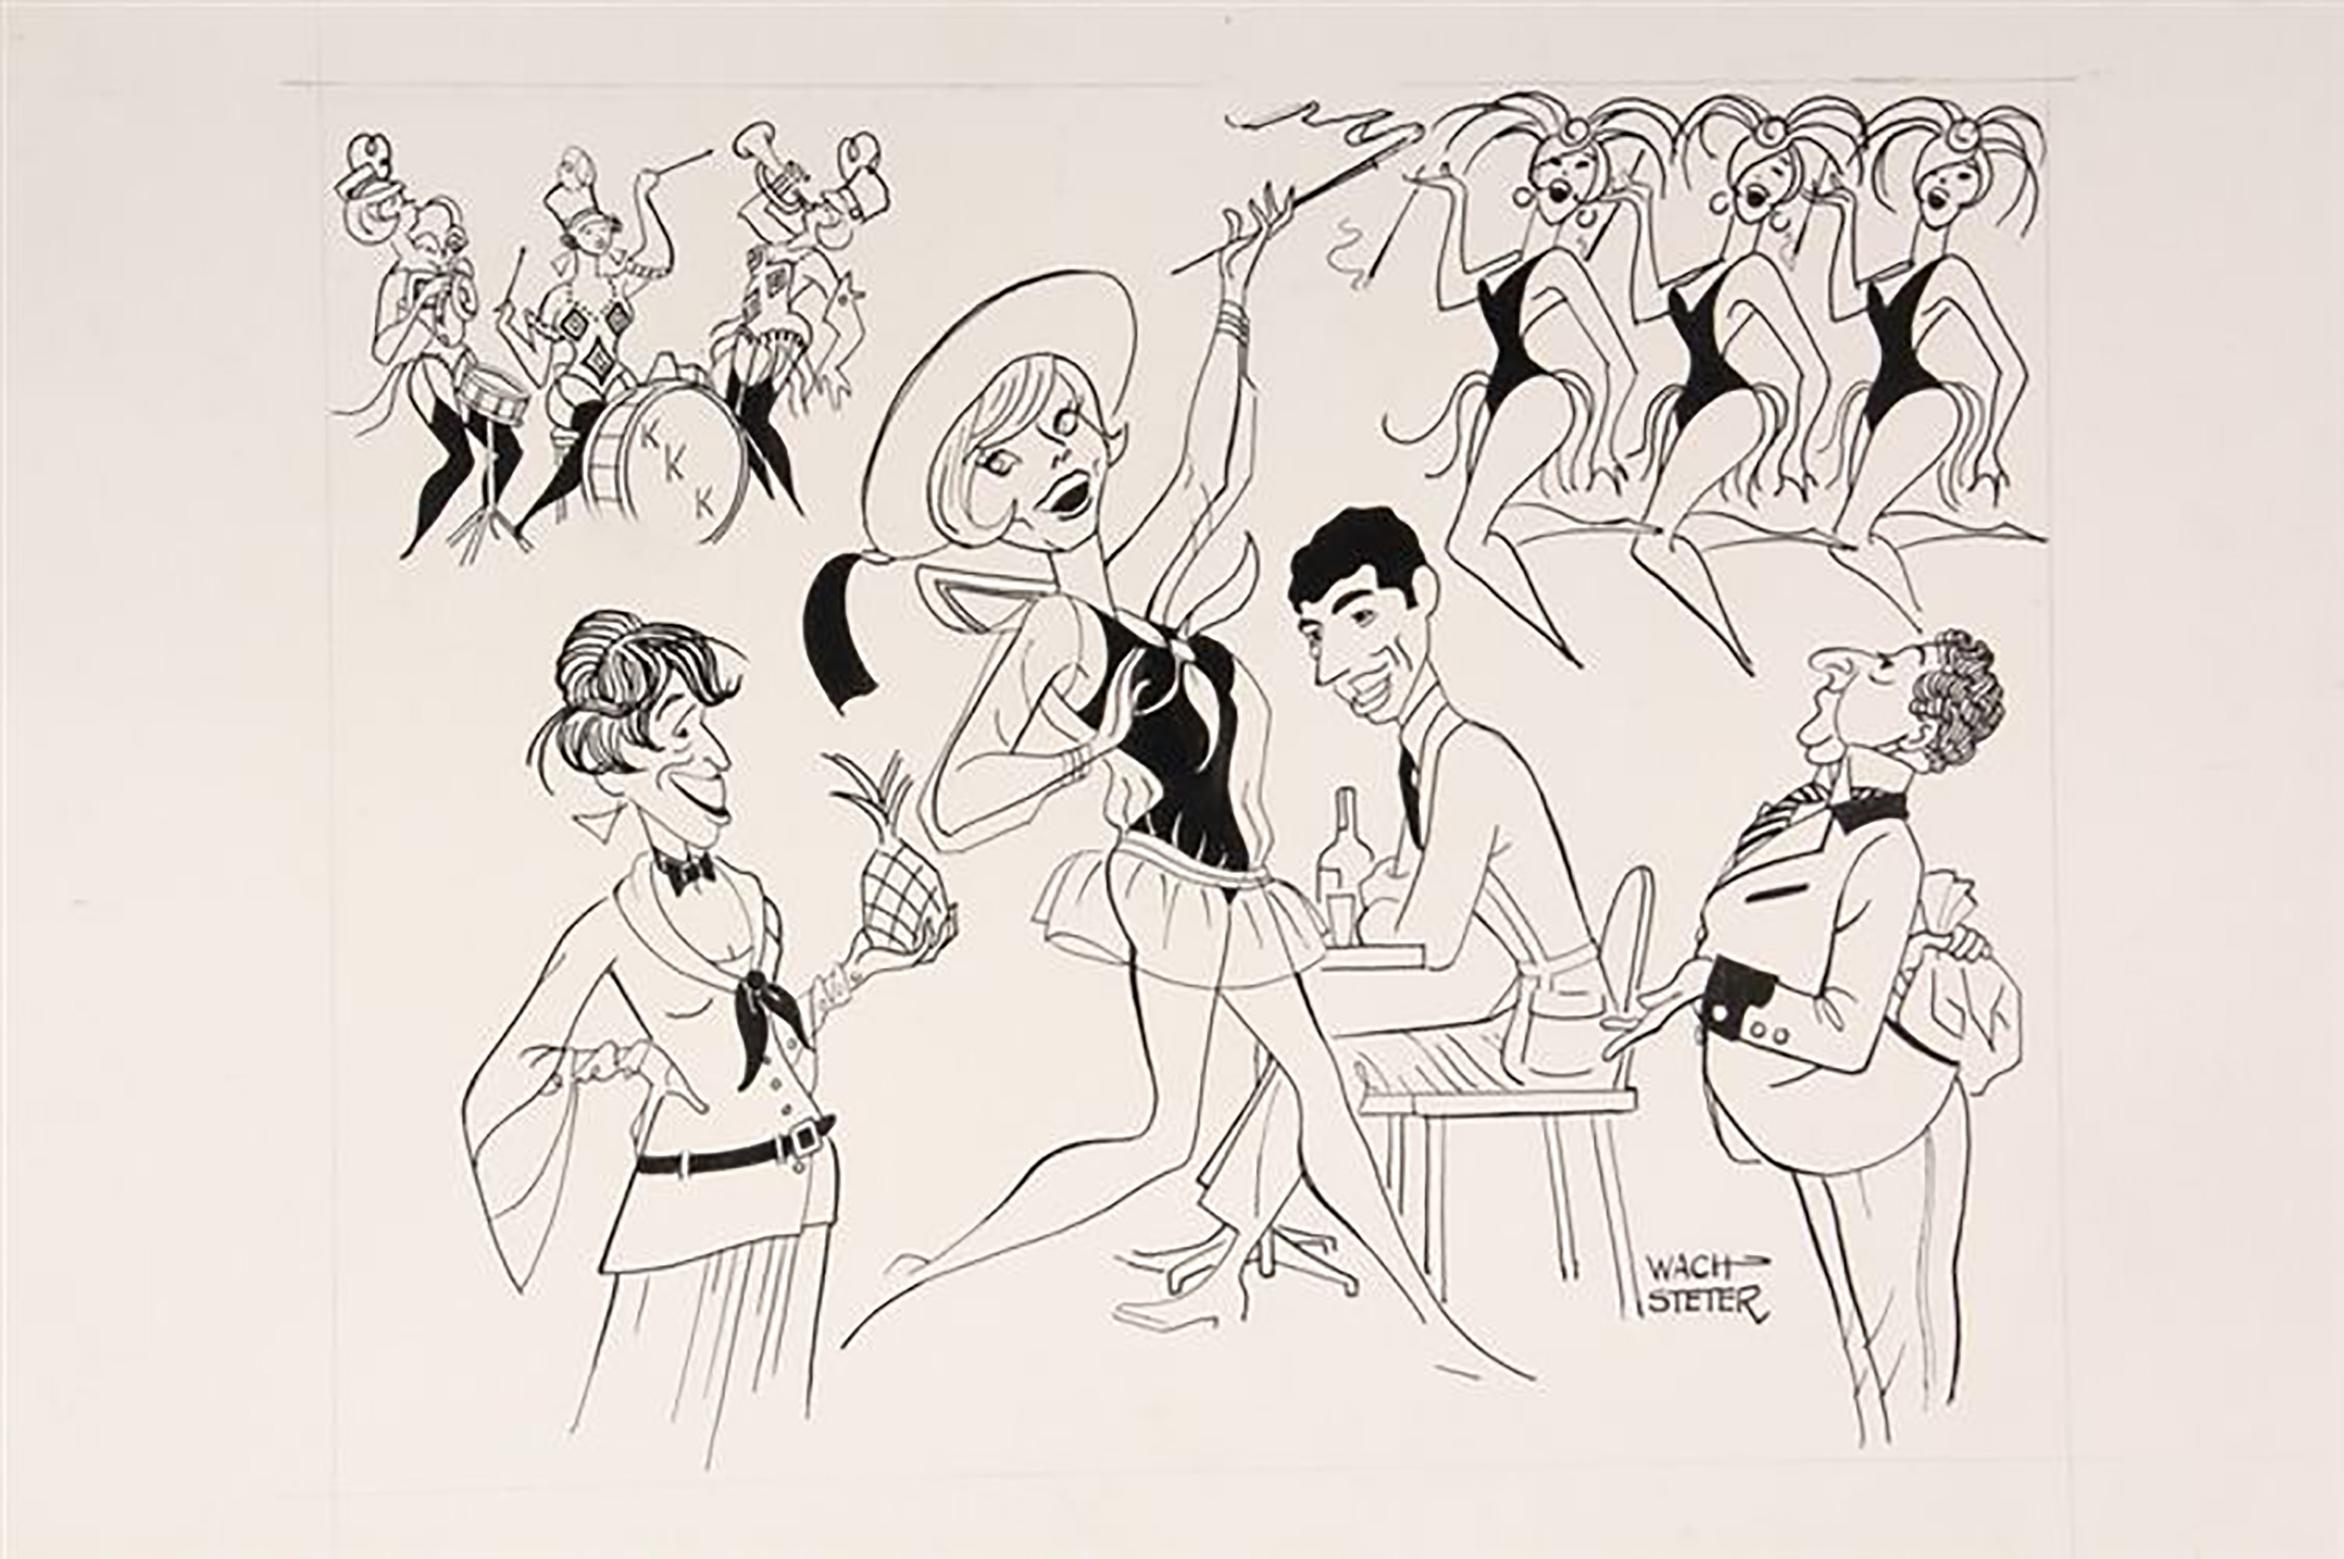 George Wachsteter Figurative Art - Caricature of the Original Broadway Production of "Cabaret"